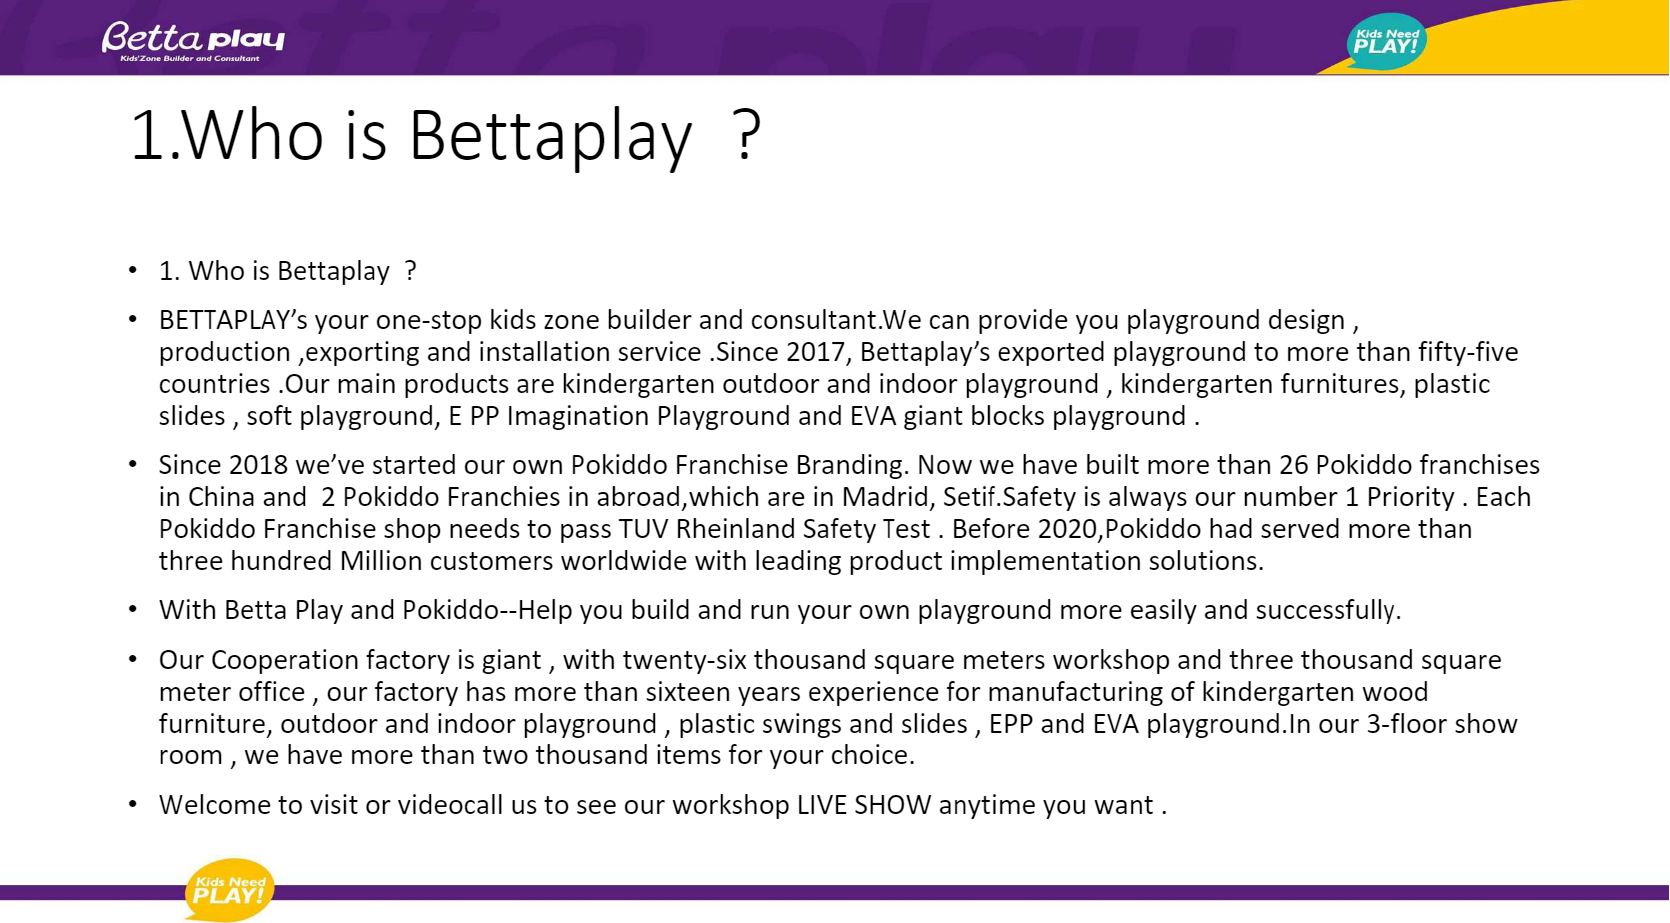 who is BettaPlay